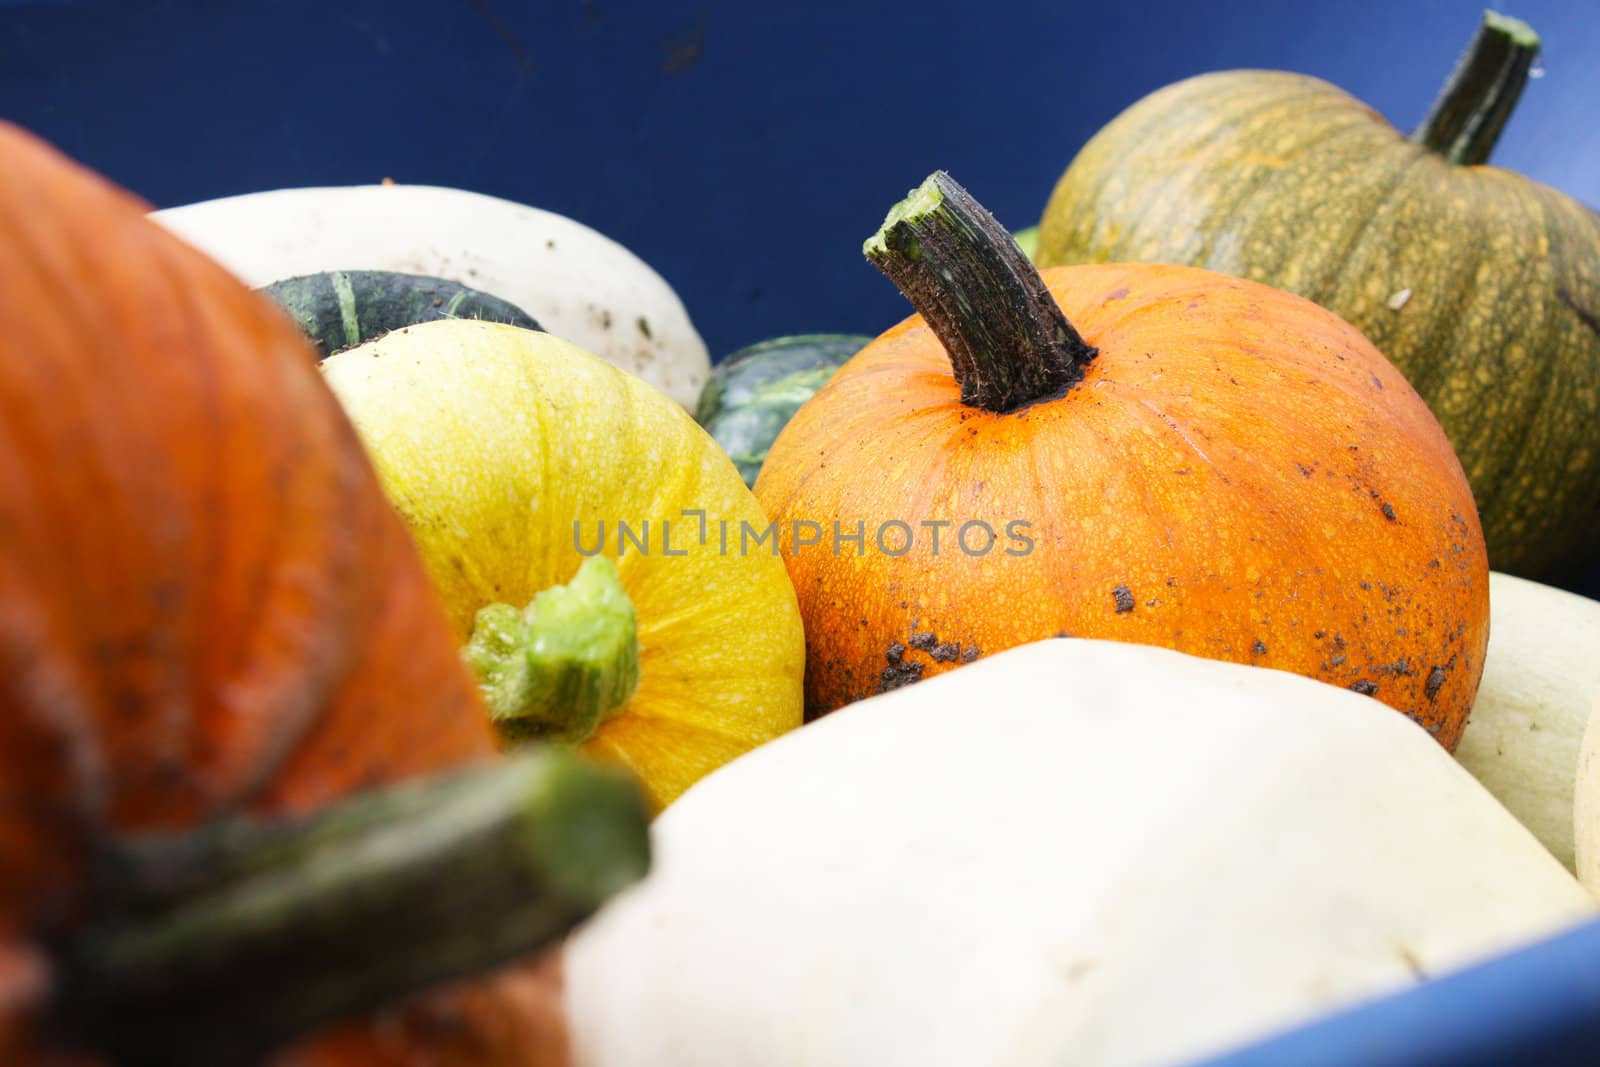 Close-up background image of a variety of organic heirloom winter squashes, including pumpkins, in a blue wheelbarrow.  







Squash Harvest II